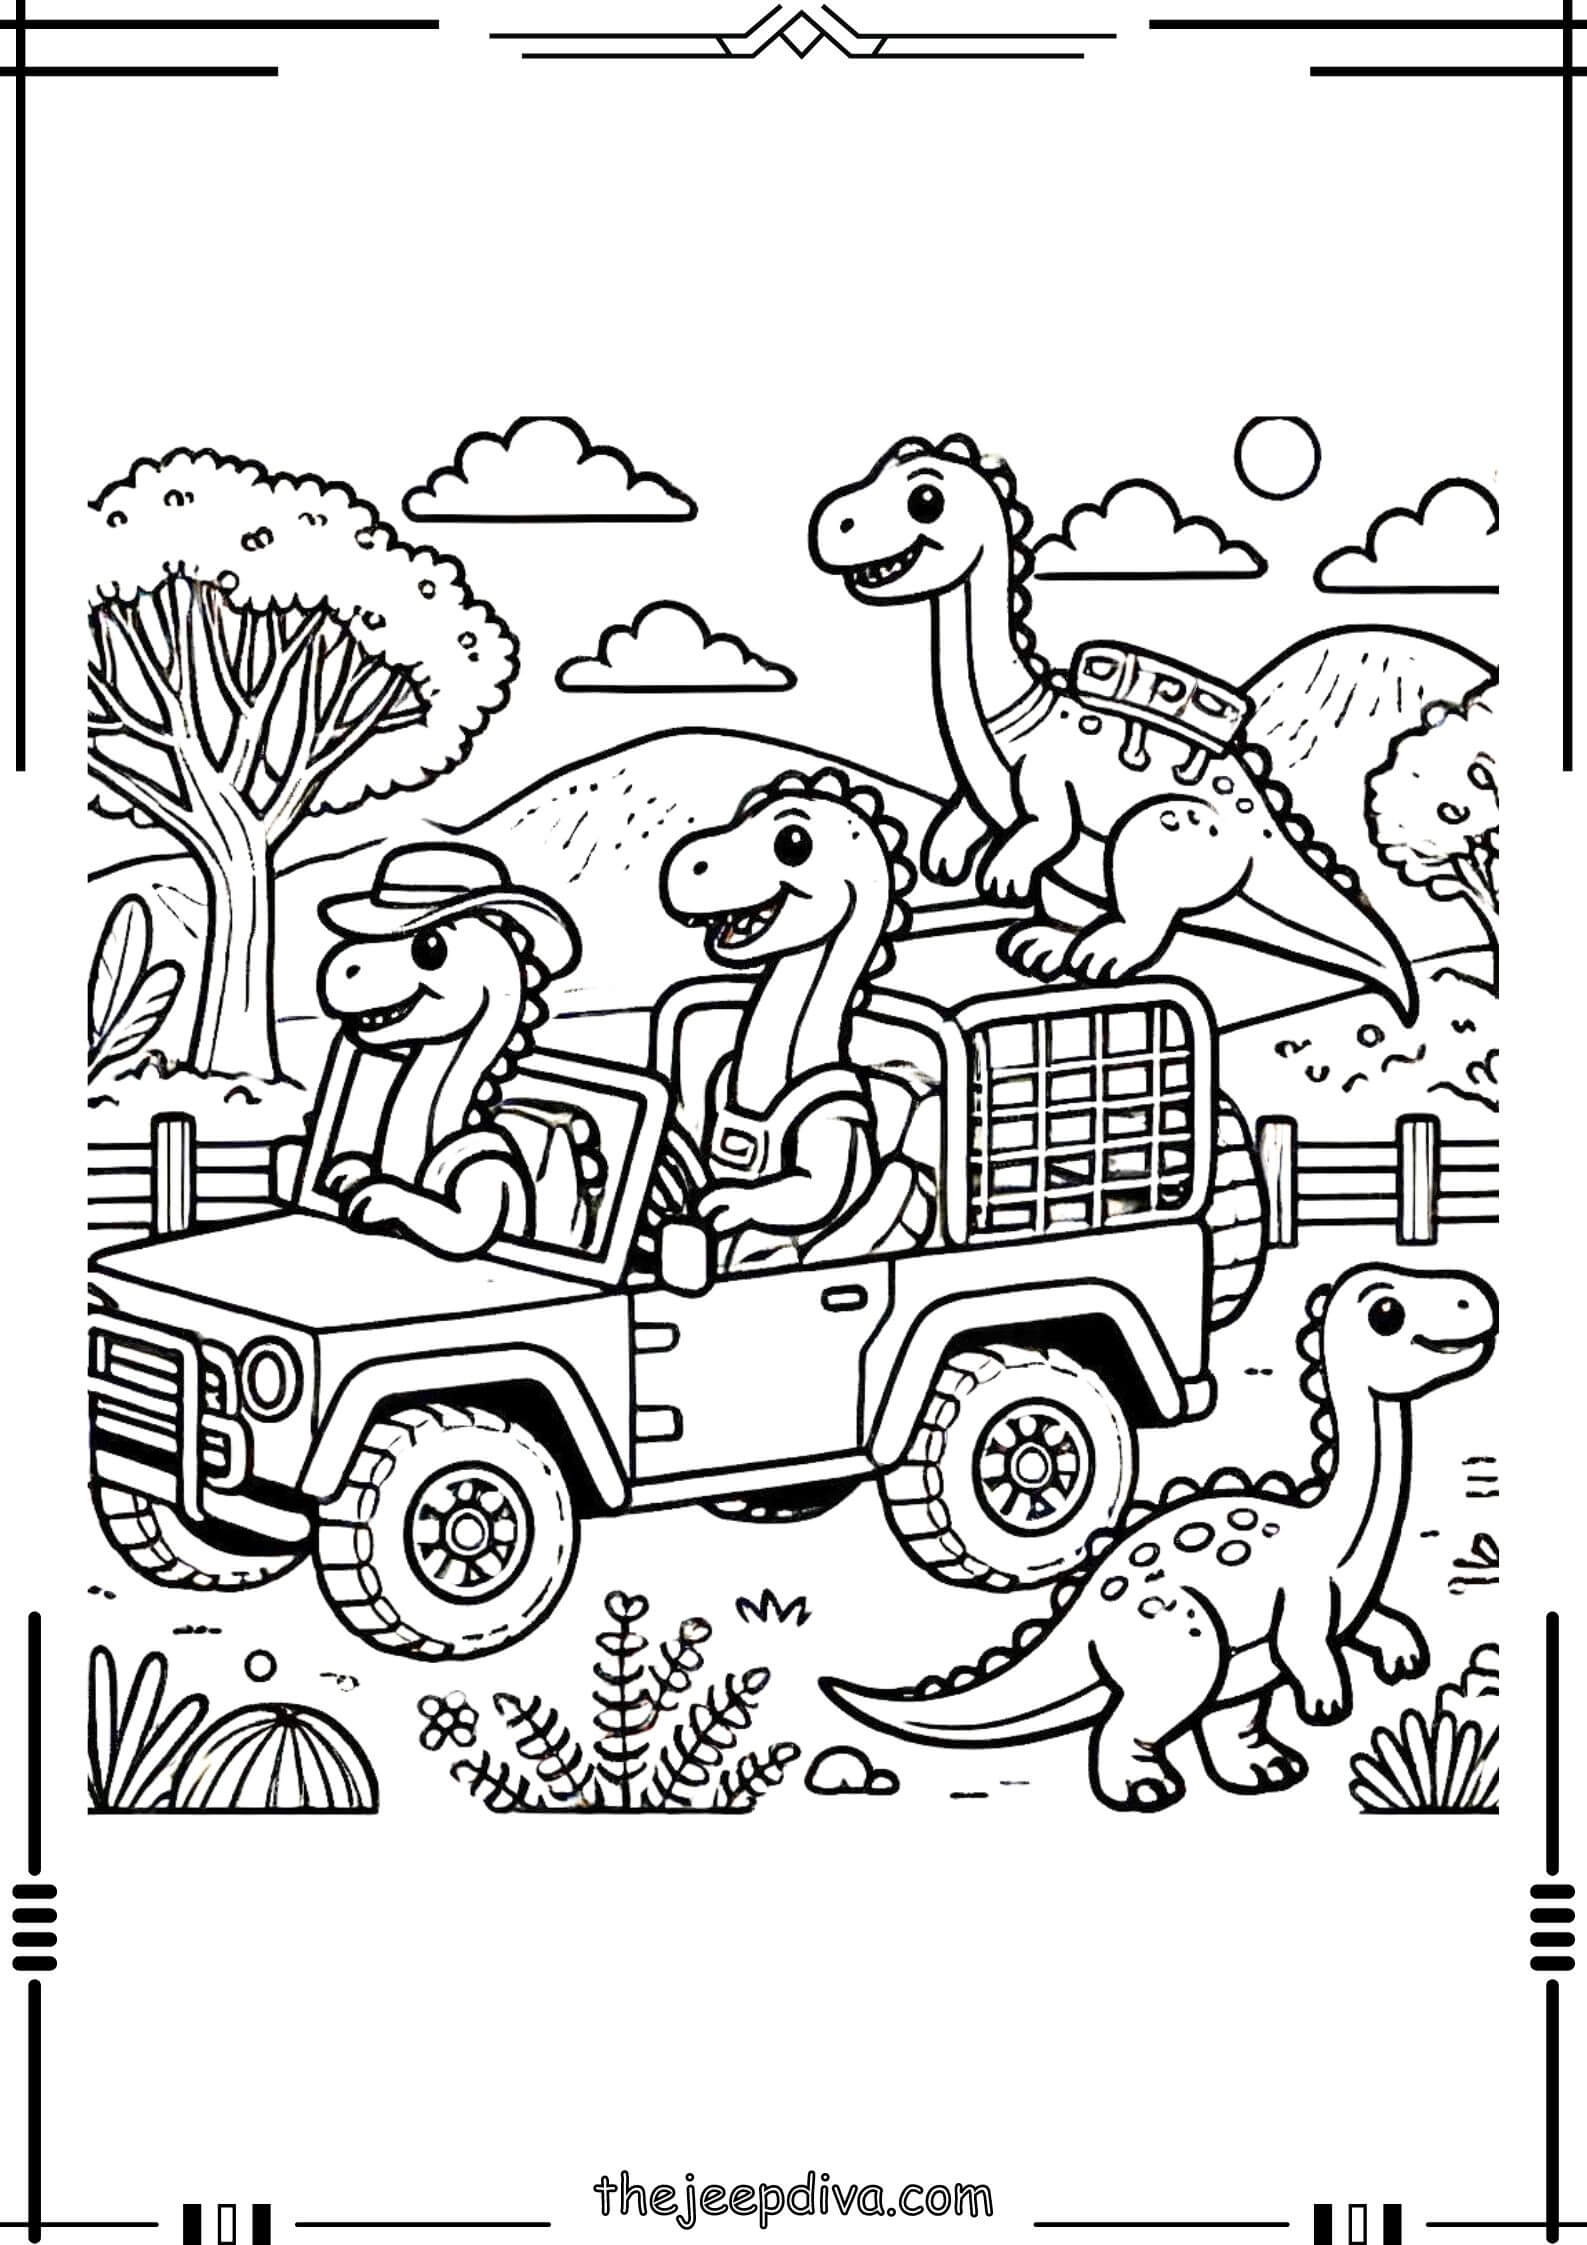 Dinosaur-Colouring-Pages-Hard-16